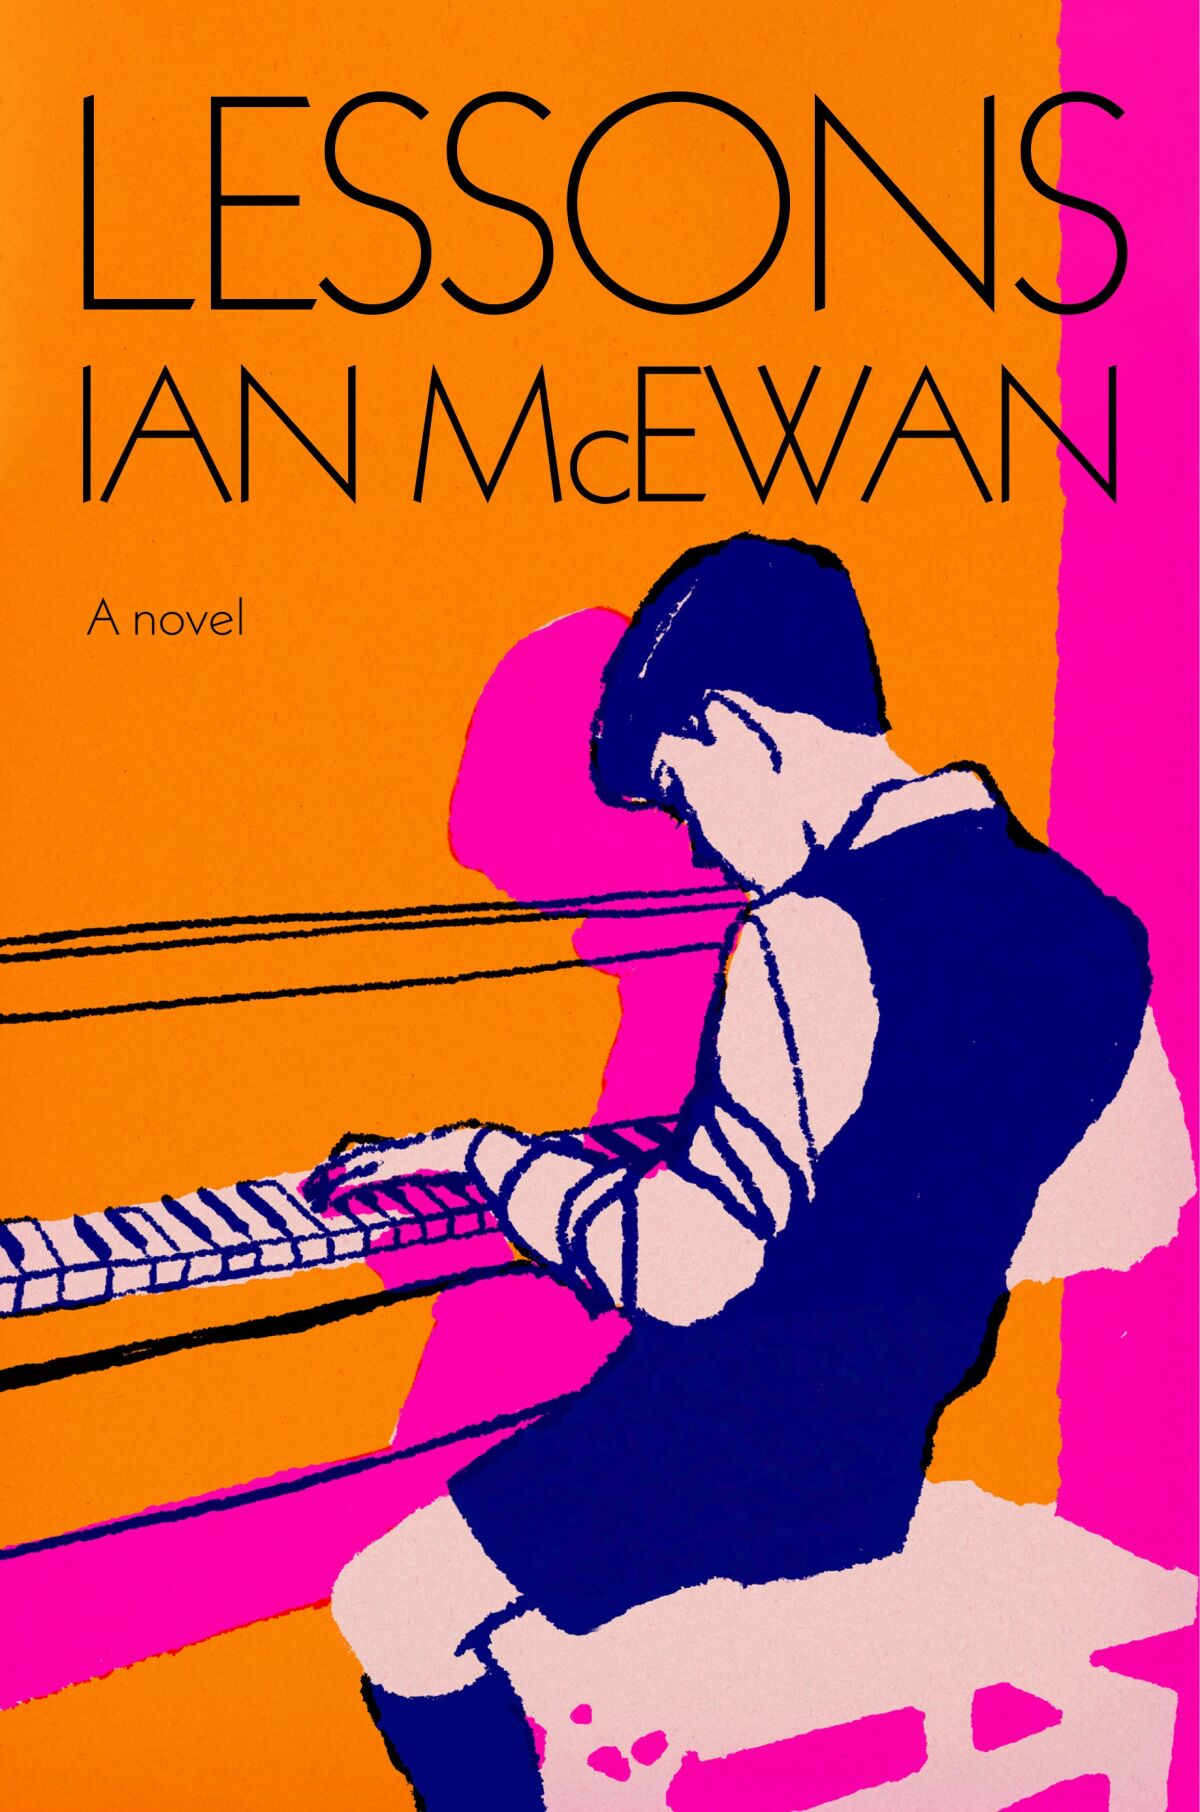 The cover of "Lessons: A Novel" contains a drawing of a boy at a piano.